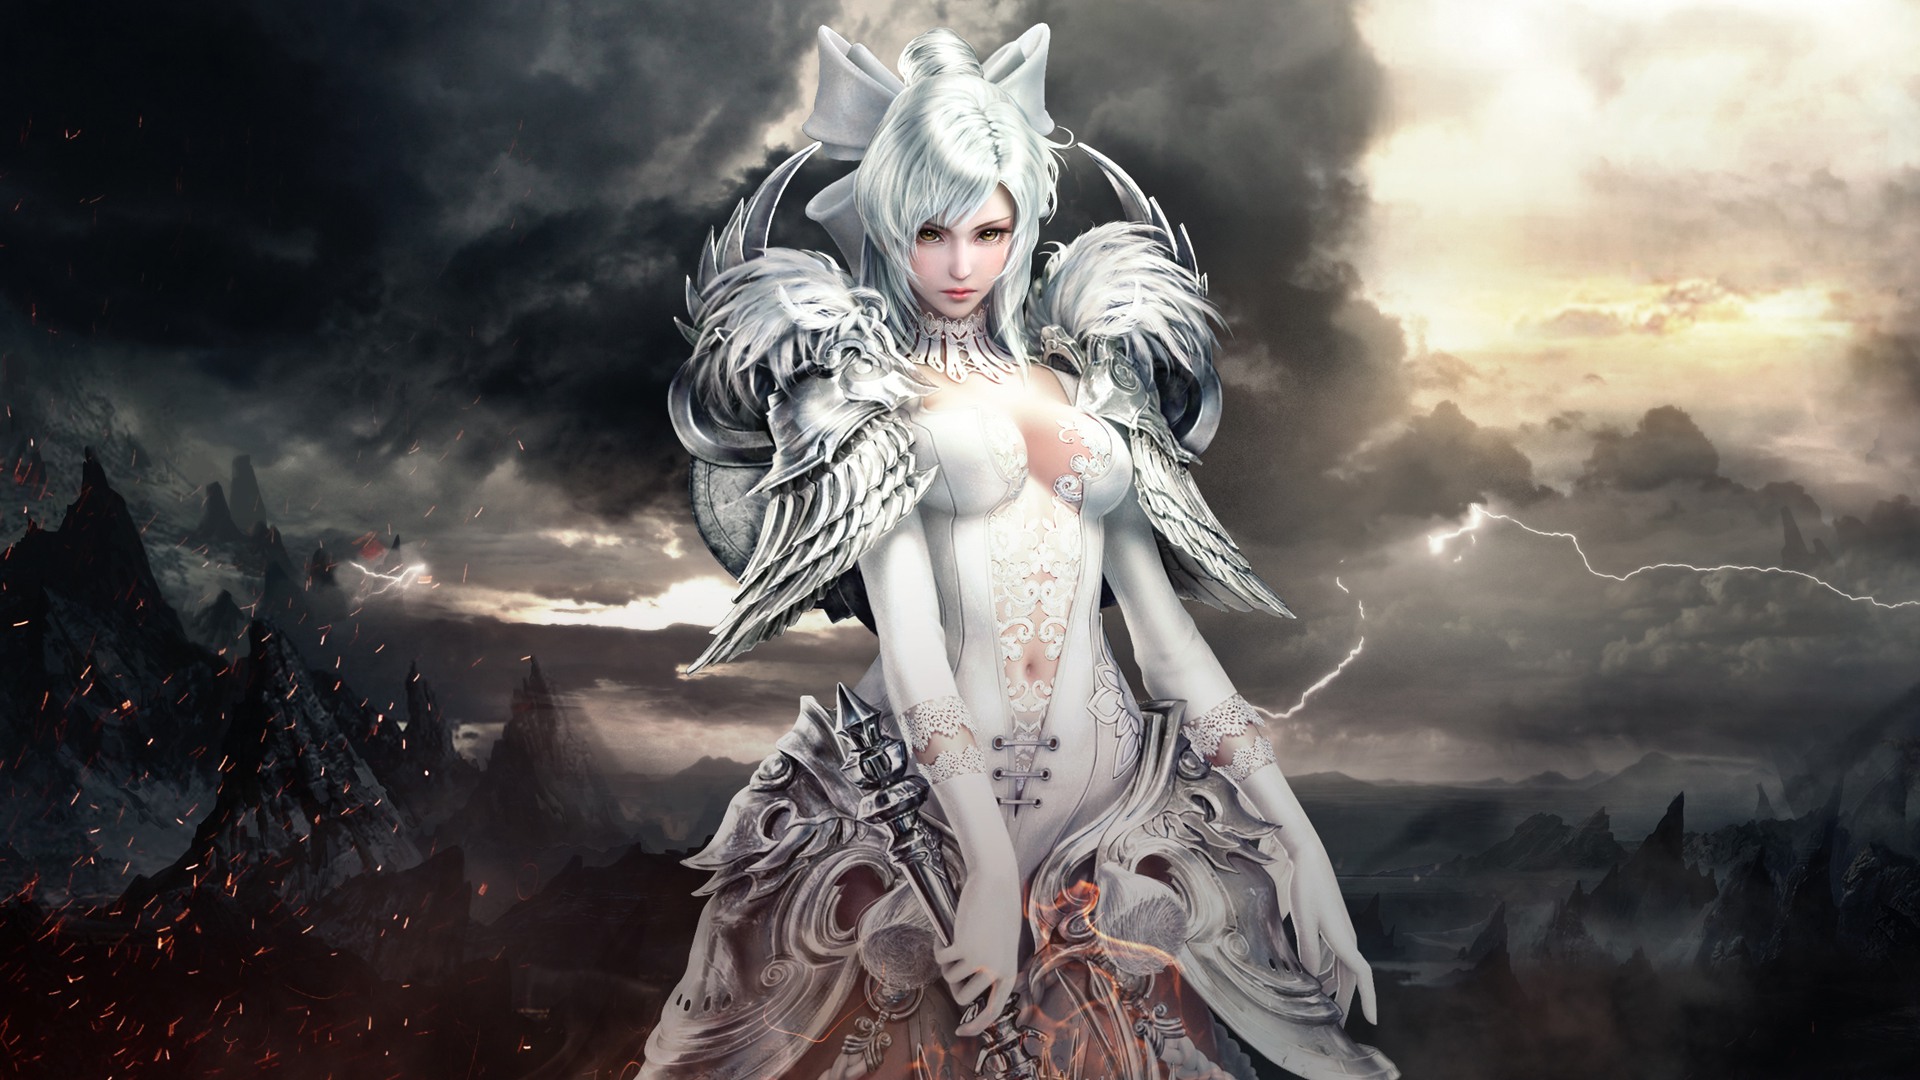 General 1920x1080 video games Revelation Online MMORPG fantasy weapon fantasy art armor gloves white hair yellow eyes clouds lightning mountains dust storm women warrior feathers